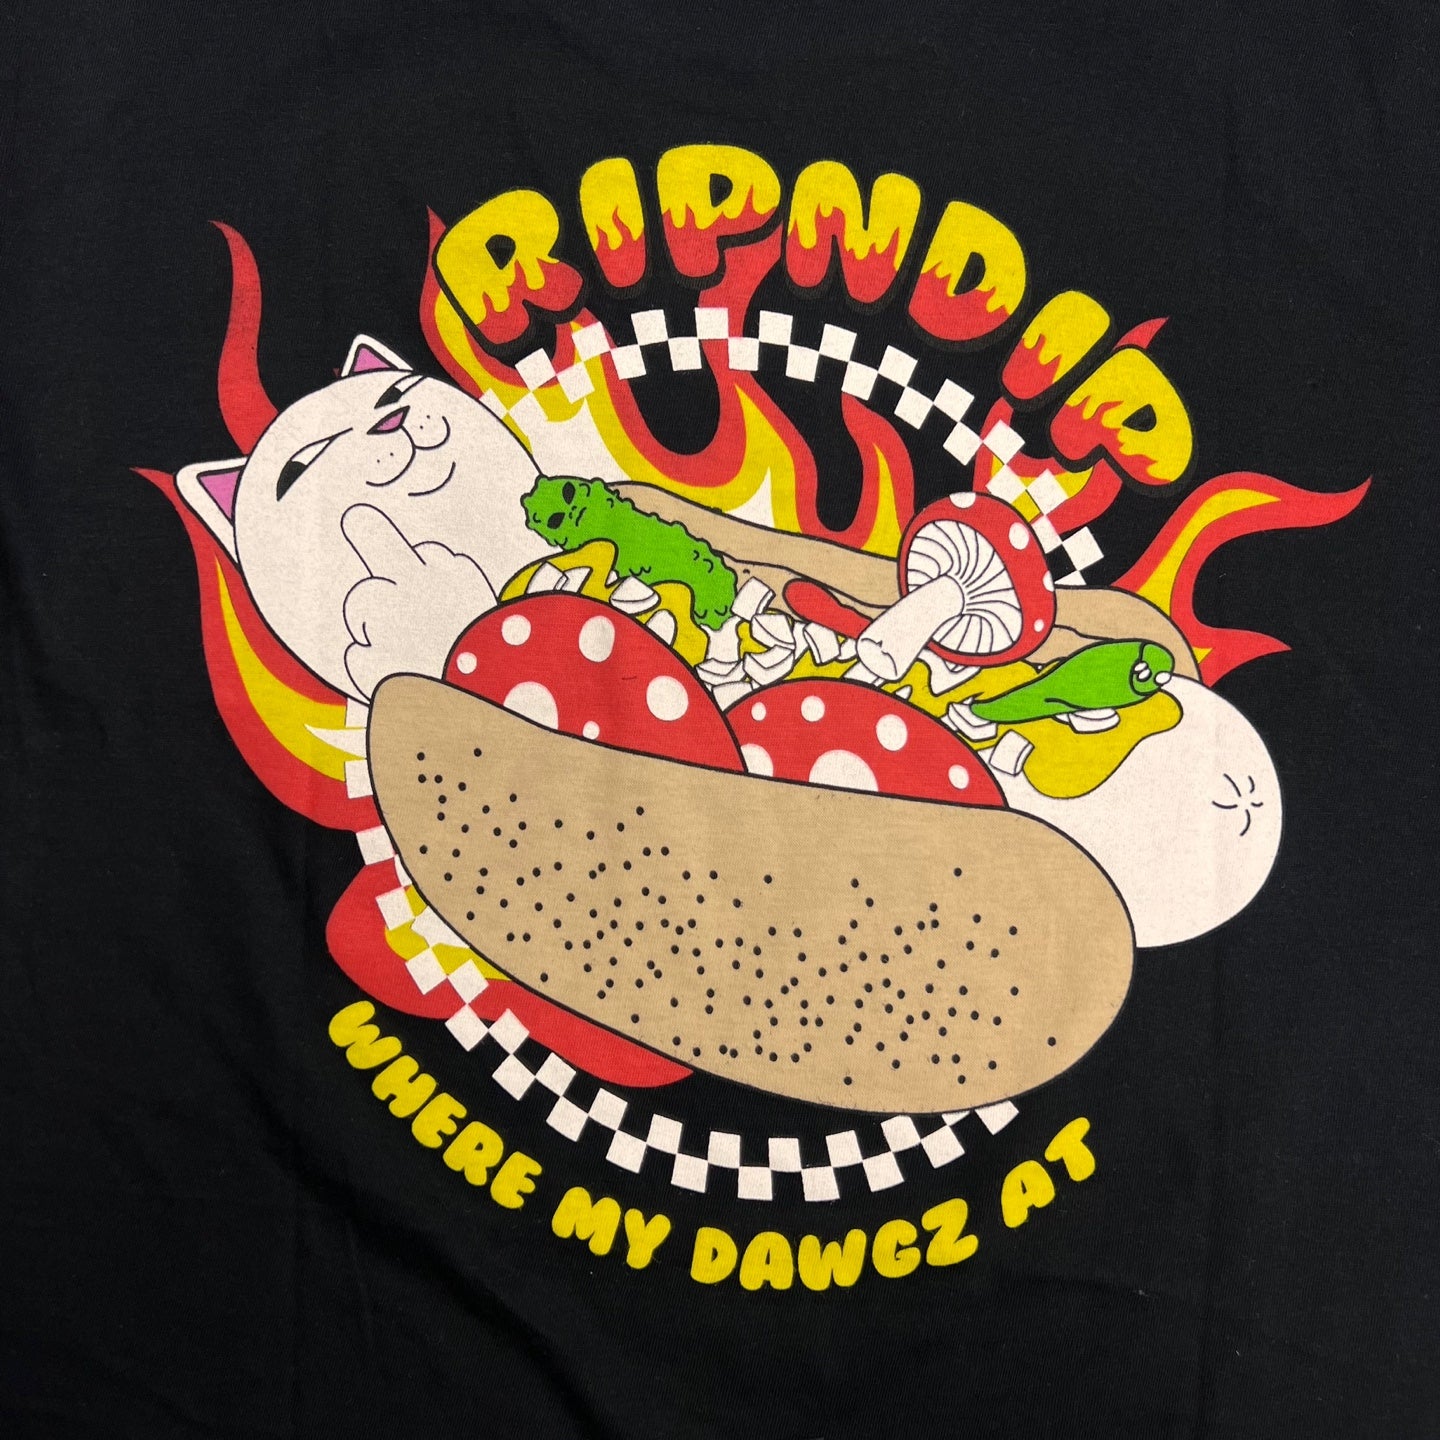 RIPNDIP Grizzly Graphic T-Shirt